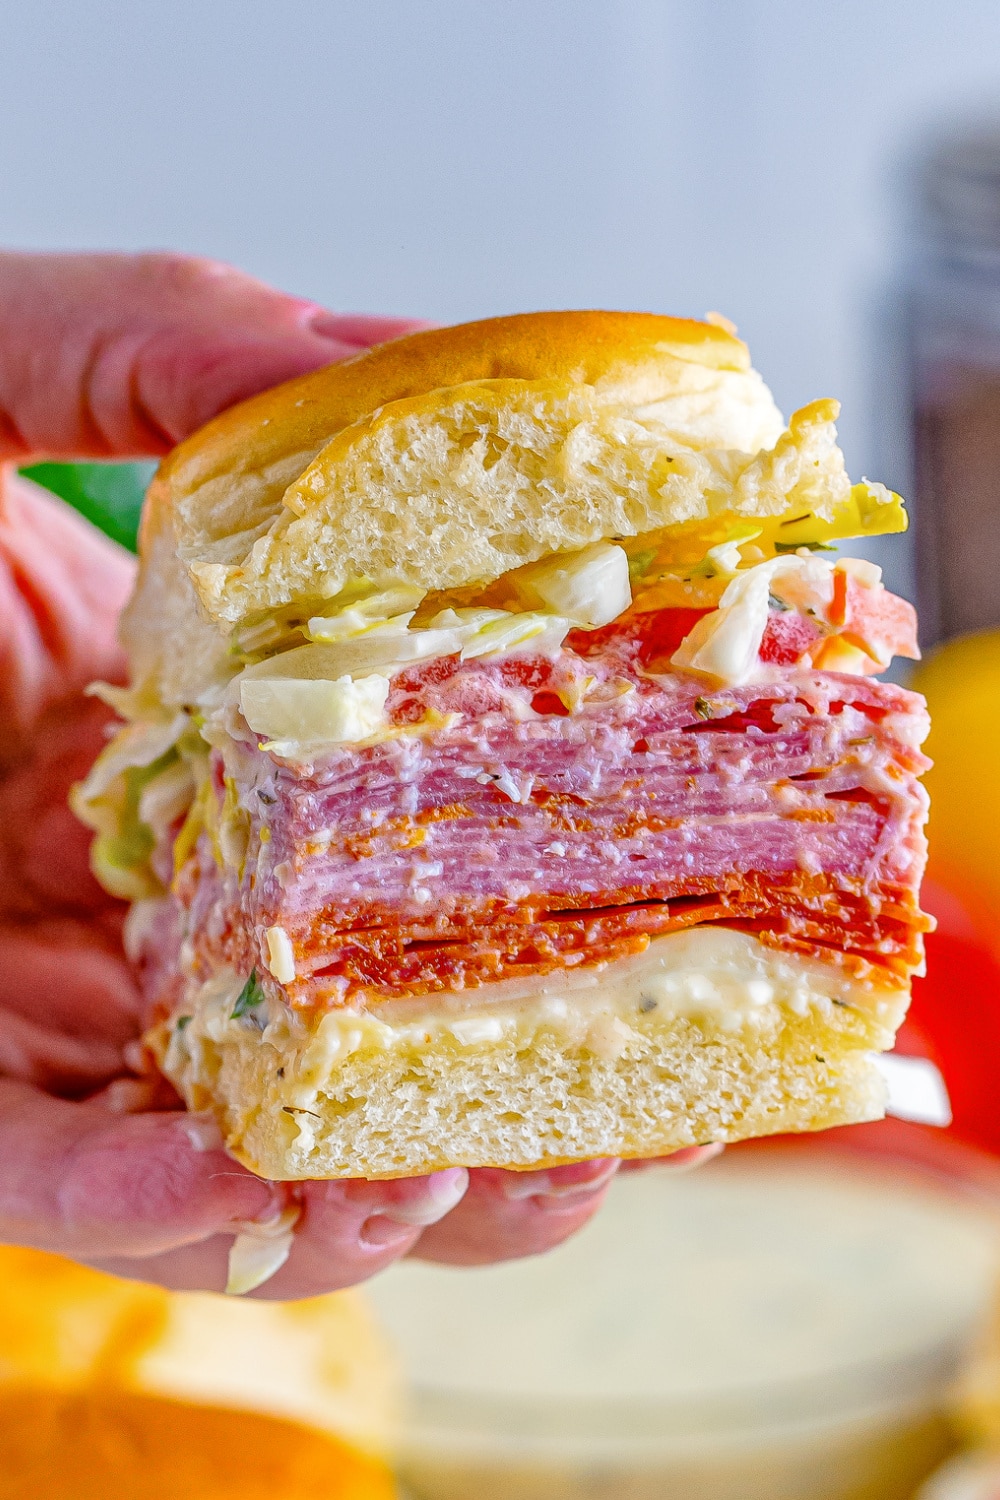 A woman's hand holds a slider piled high with meat, cheese, veggies and sauce.